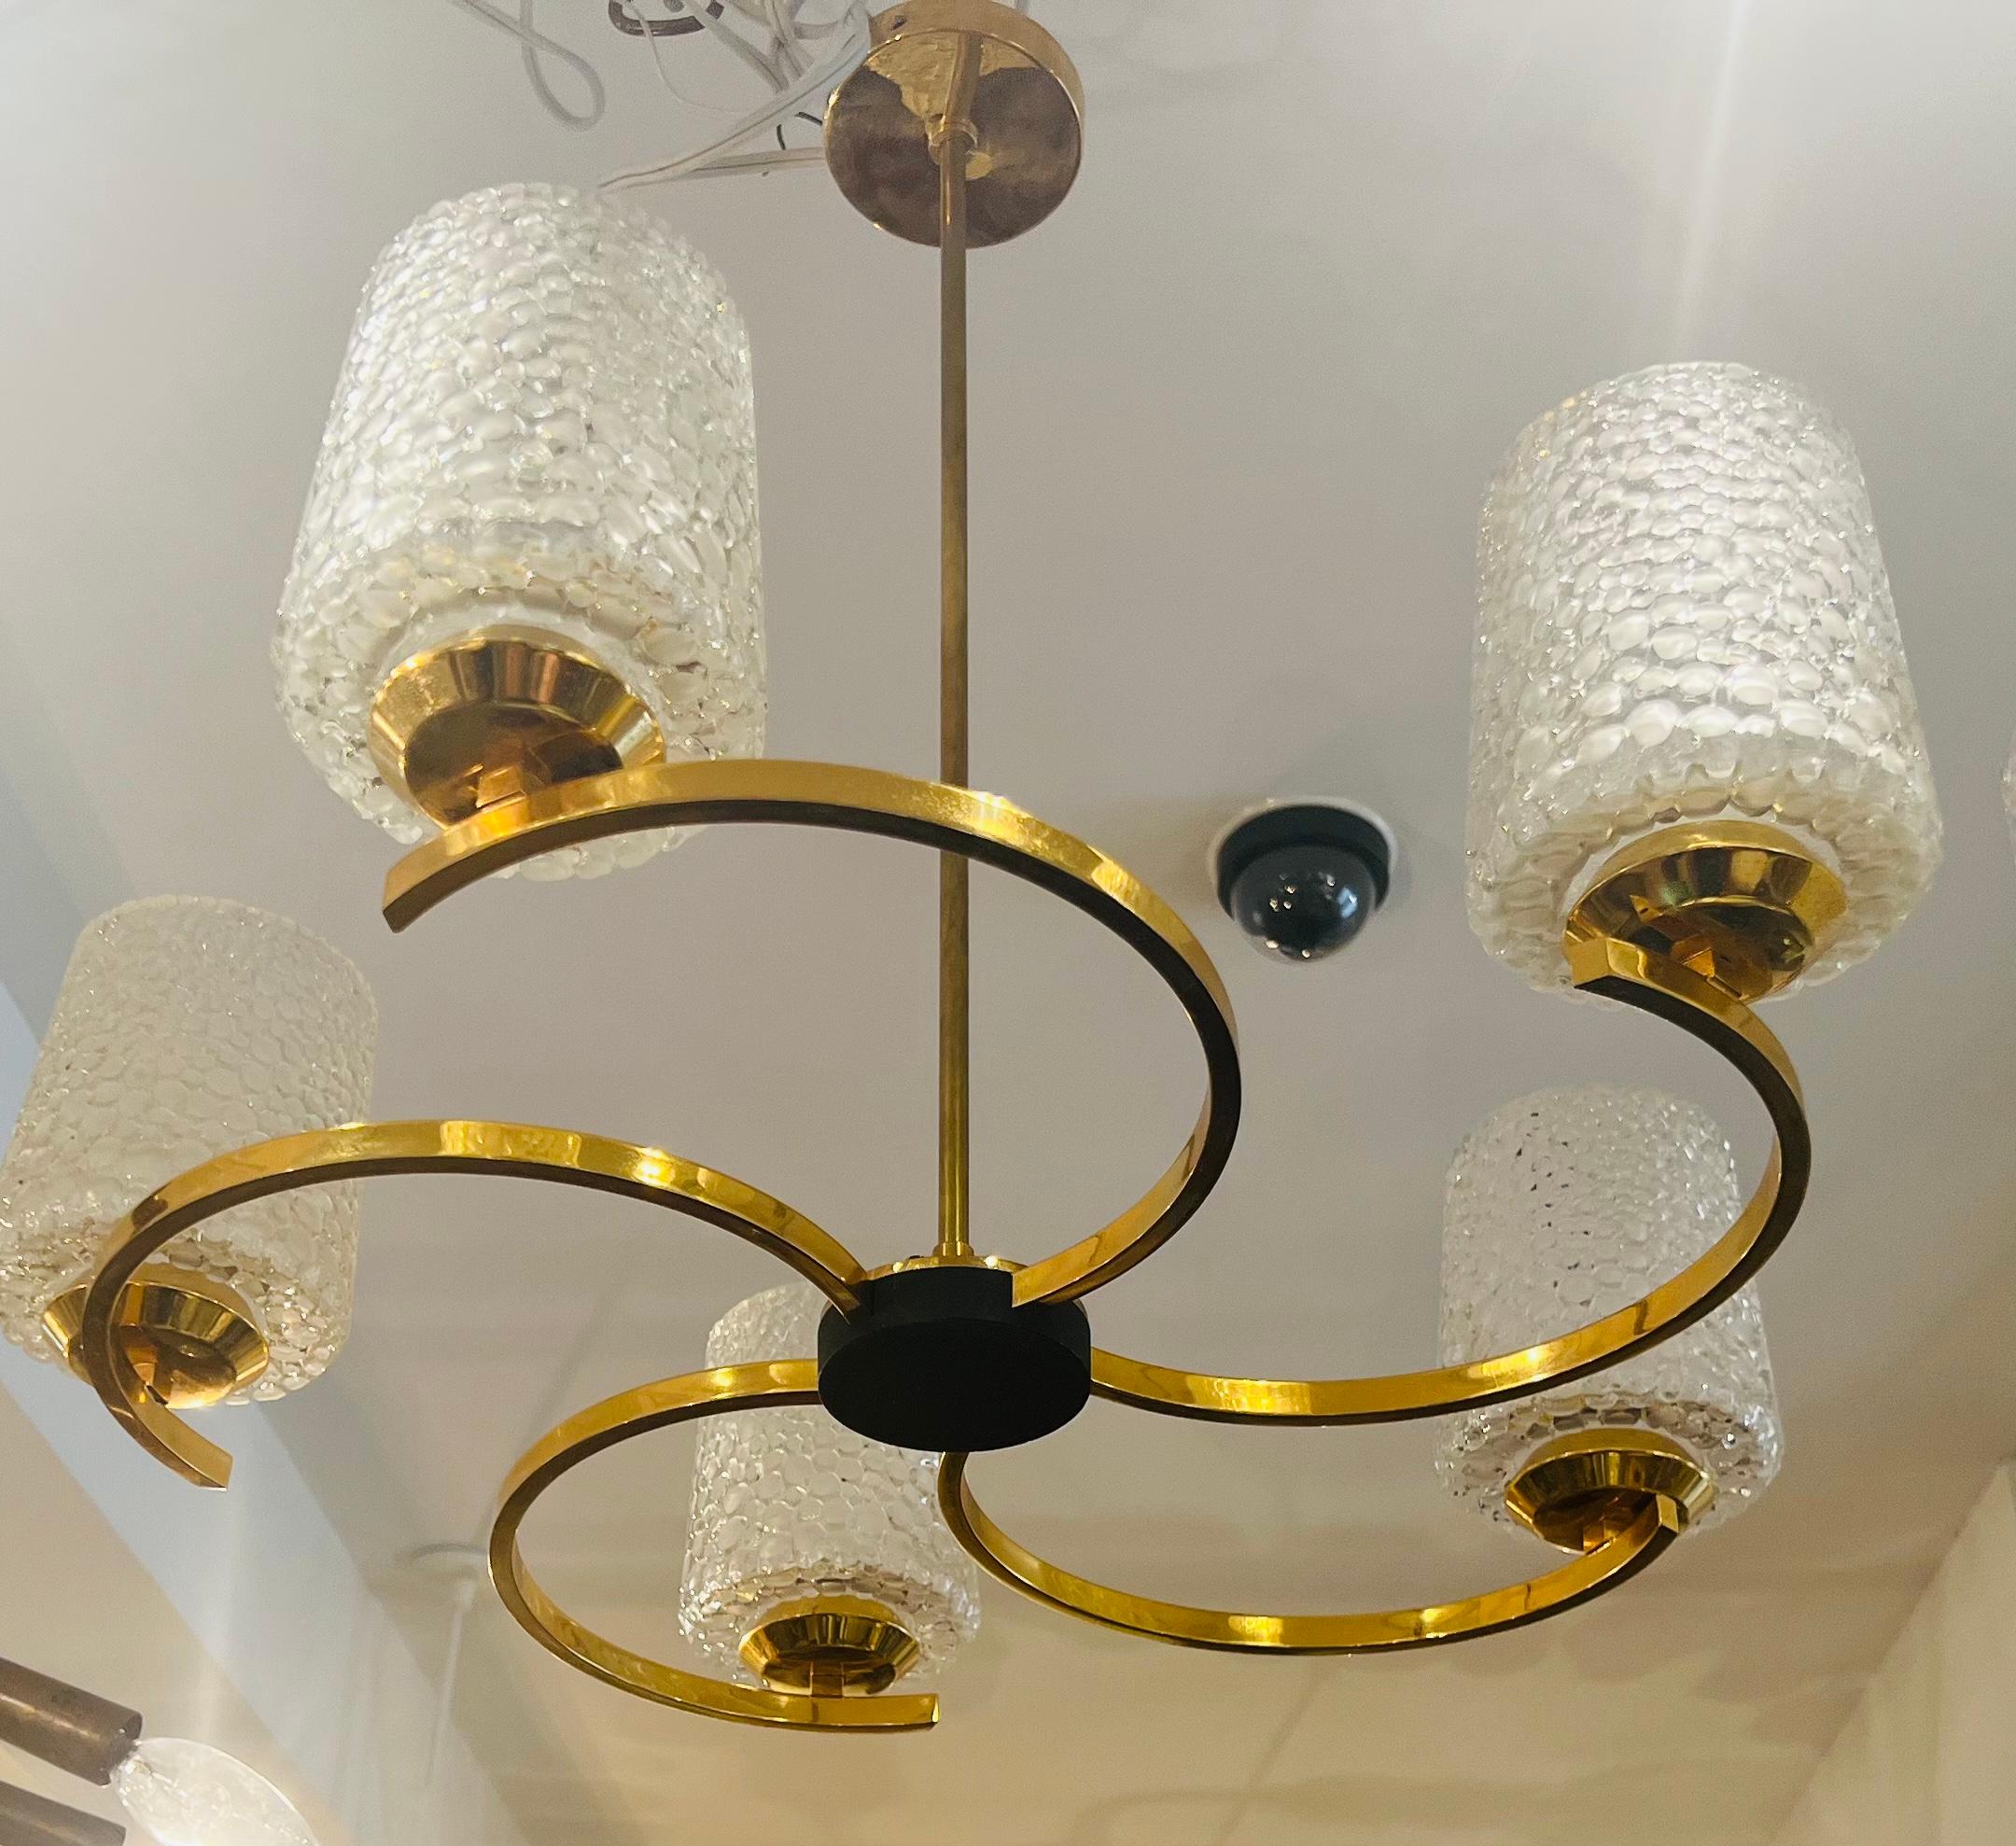 A wonderful 5 light serpentine circular golden brass French chandelier with blown frosted bubble glass shades by French lighting maker, Arlus. Rewired . Matching six light version available.